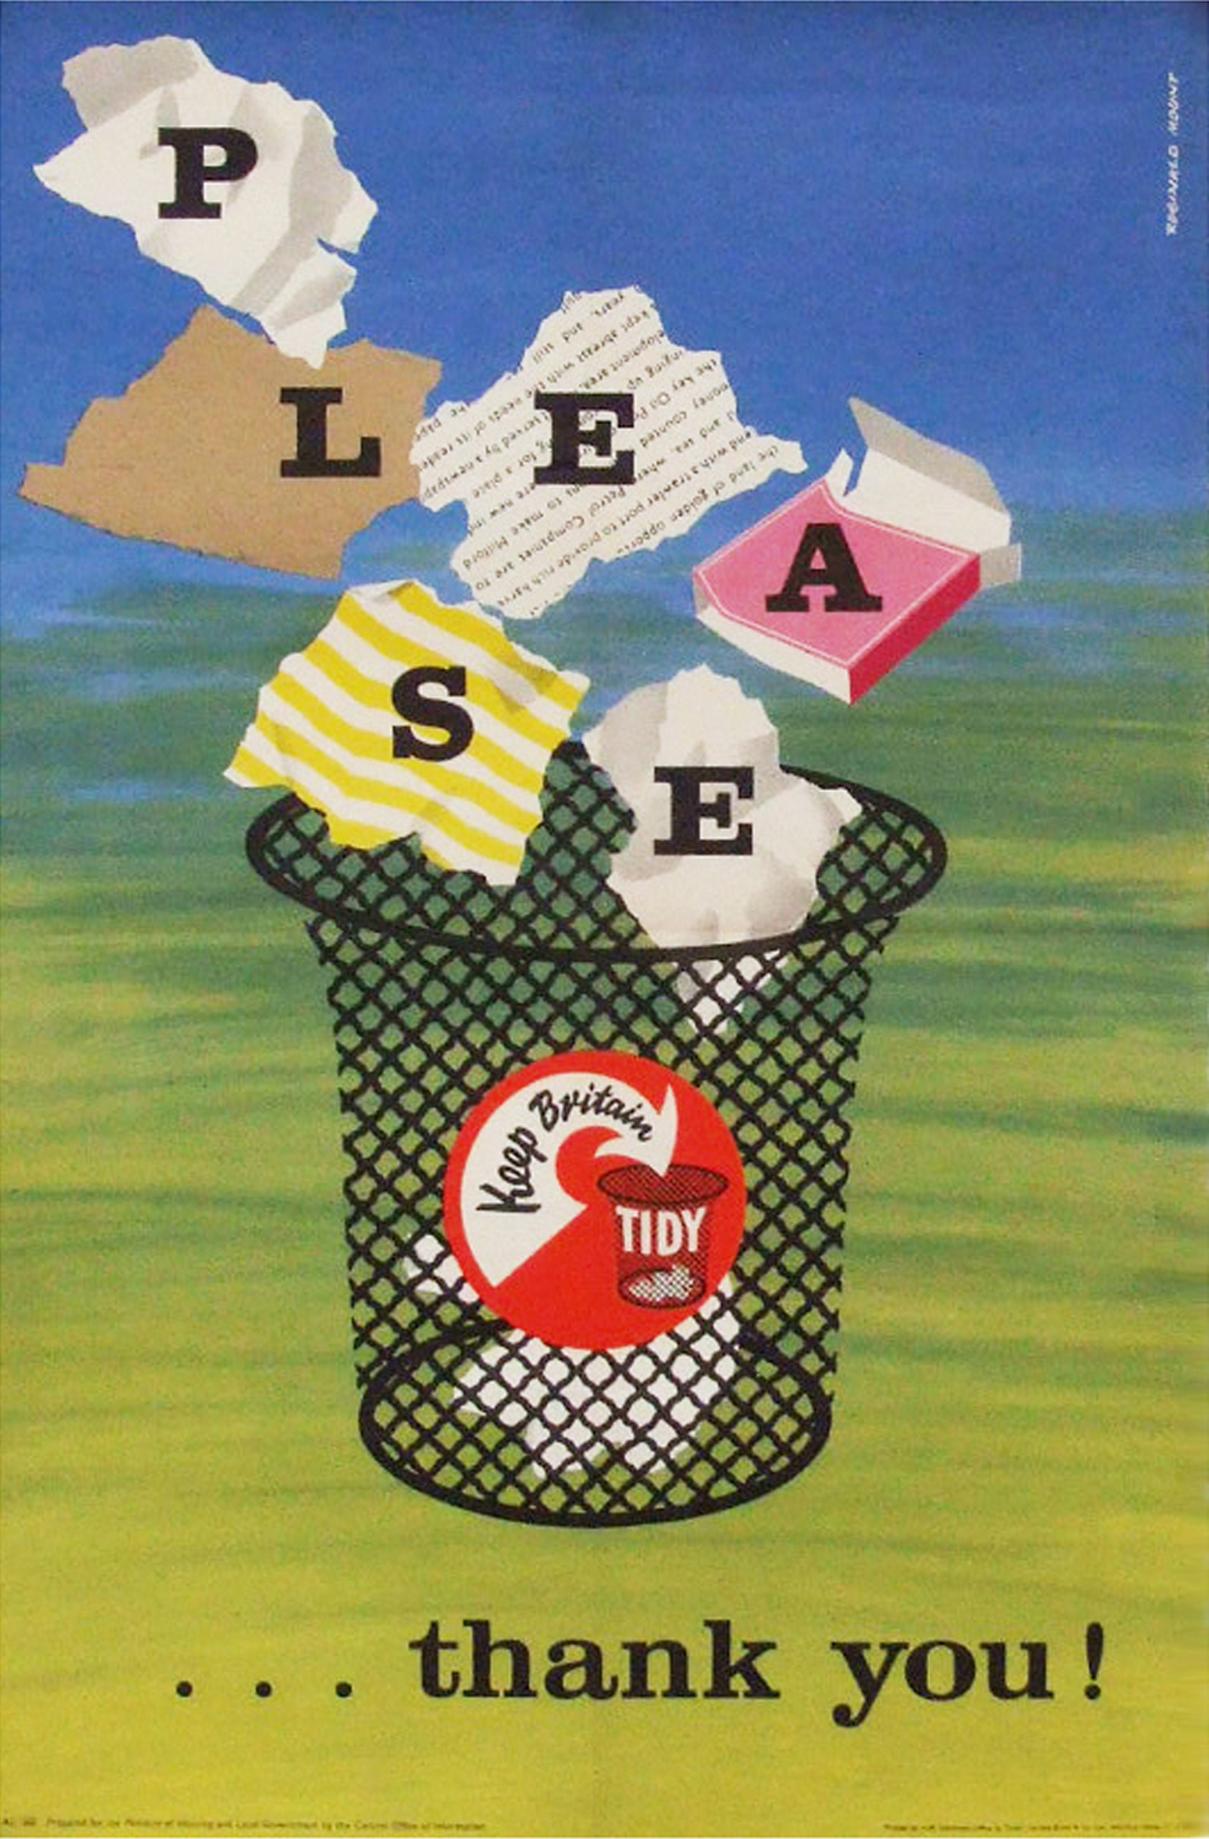 Original 1958 Government information poster designed by Reginald Mount for the Keep Britain Tidy Campaign, UK.

First edition color offset lithograph.

Folded as issued.

Measures: L 74 cm x W 48 cm.